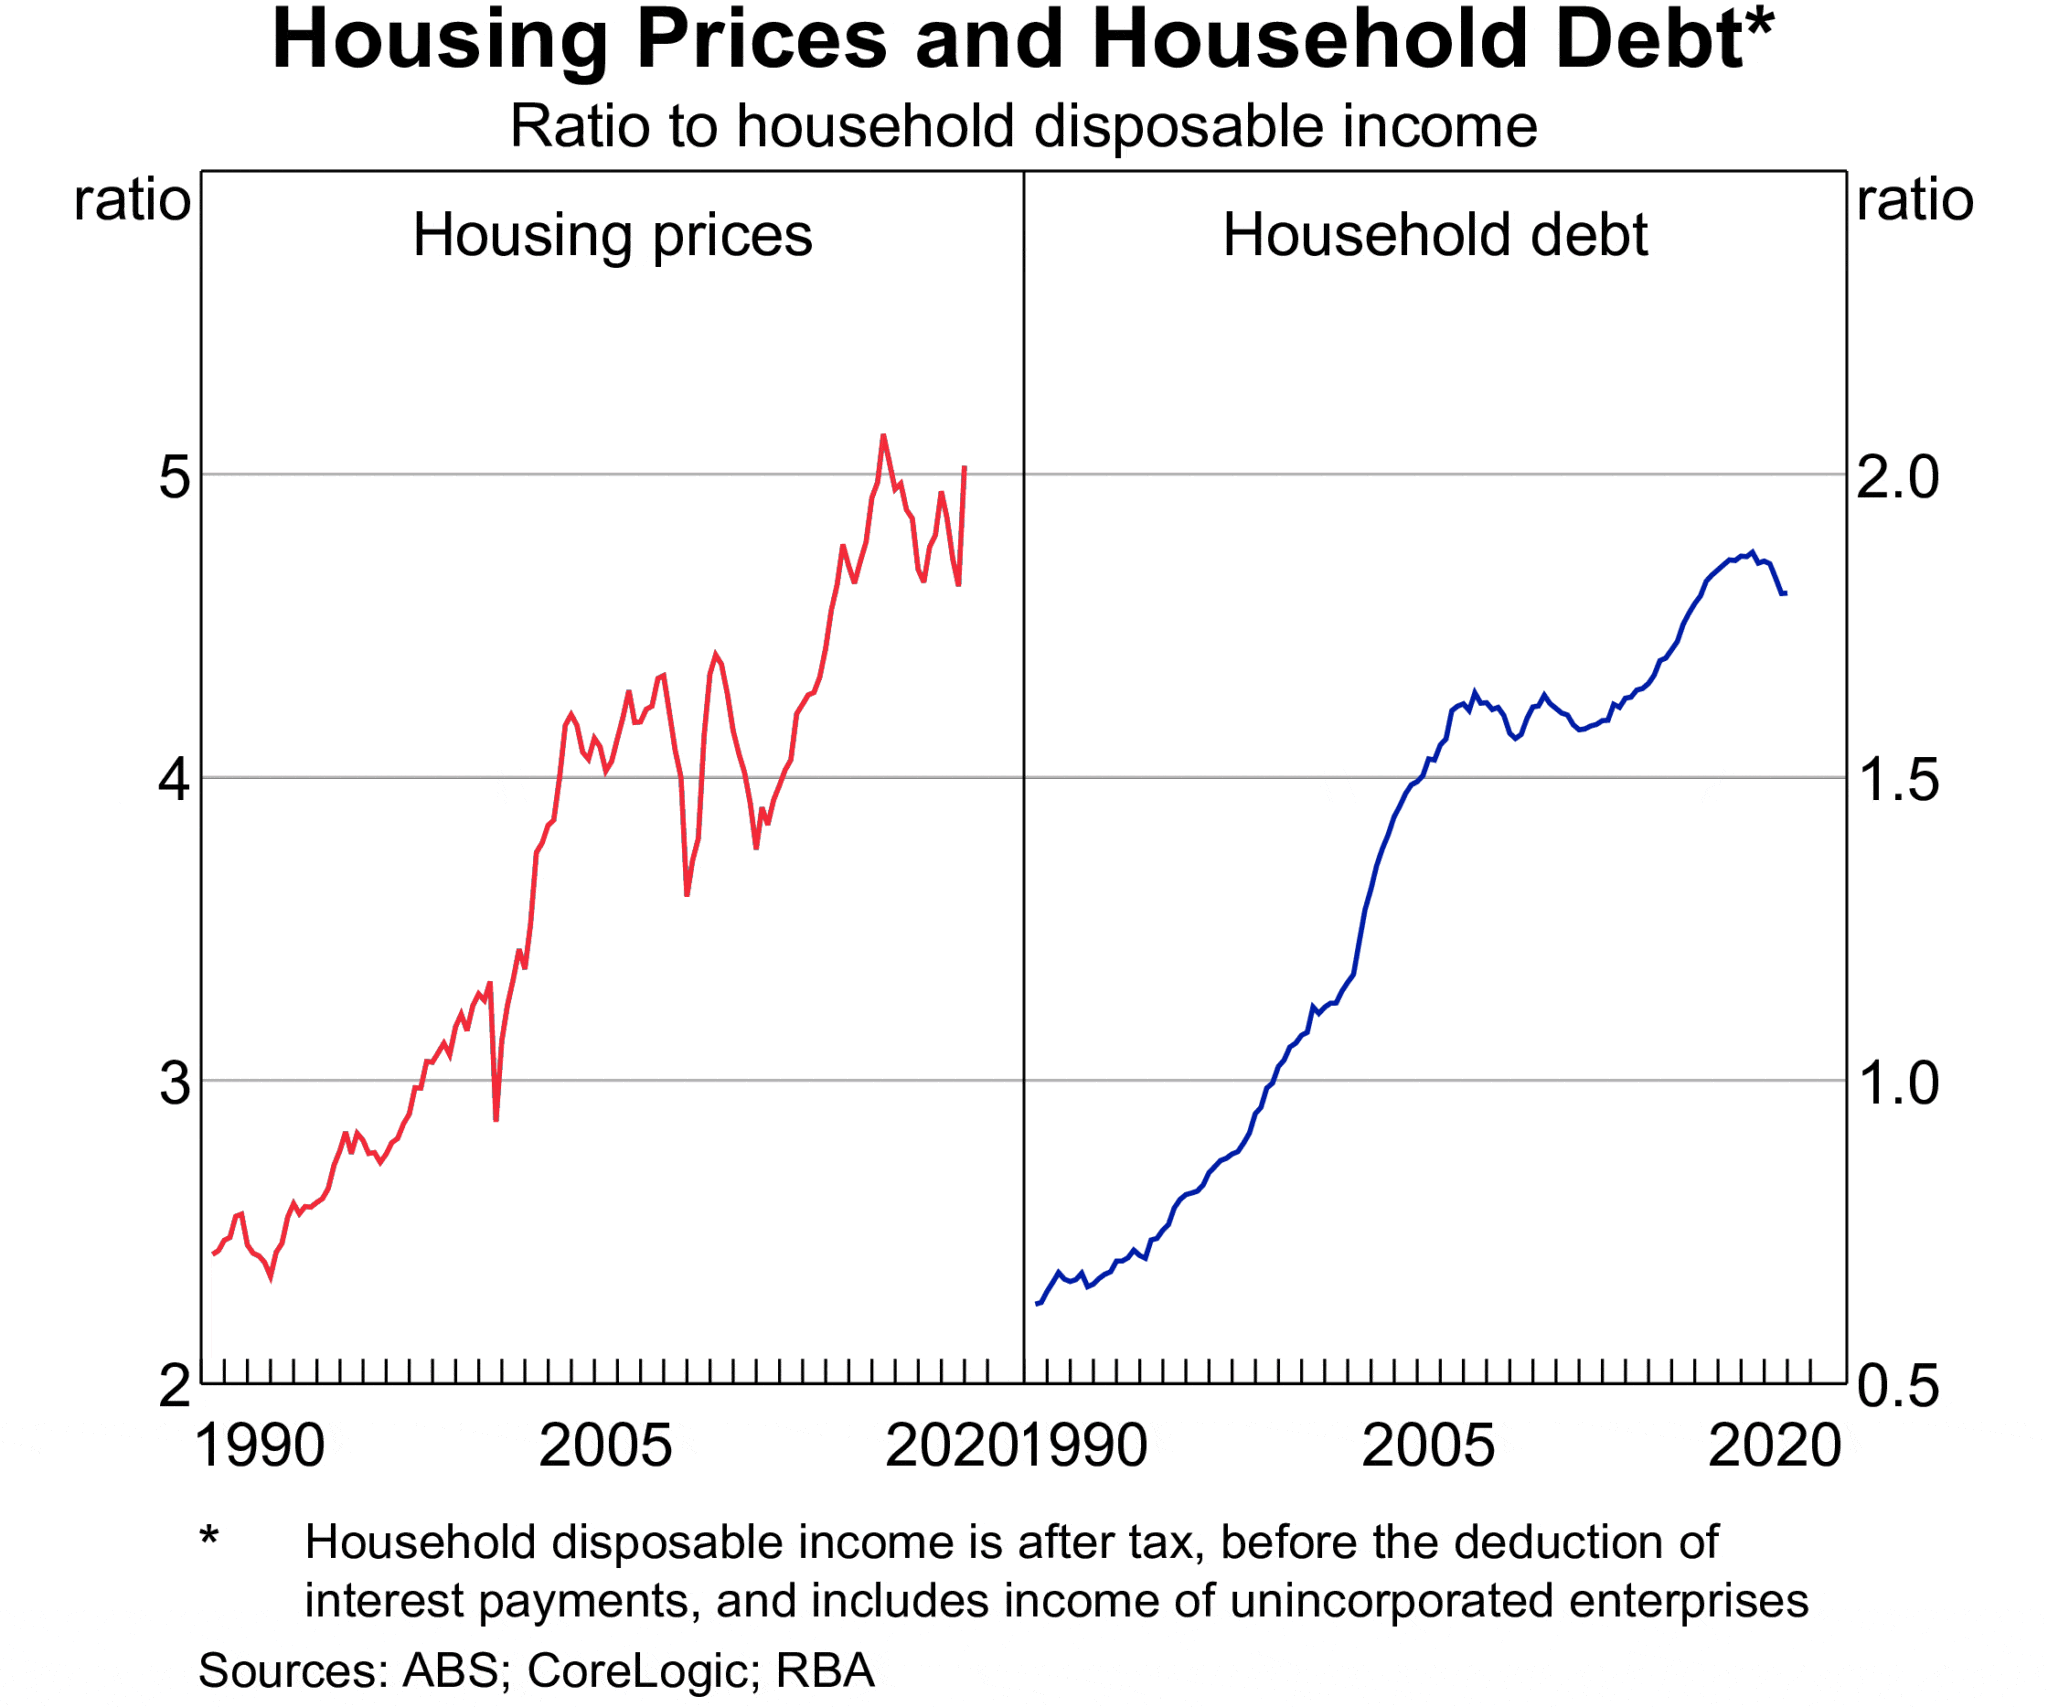 housing prices and household debt - BORRO